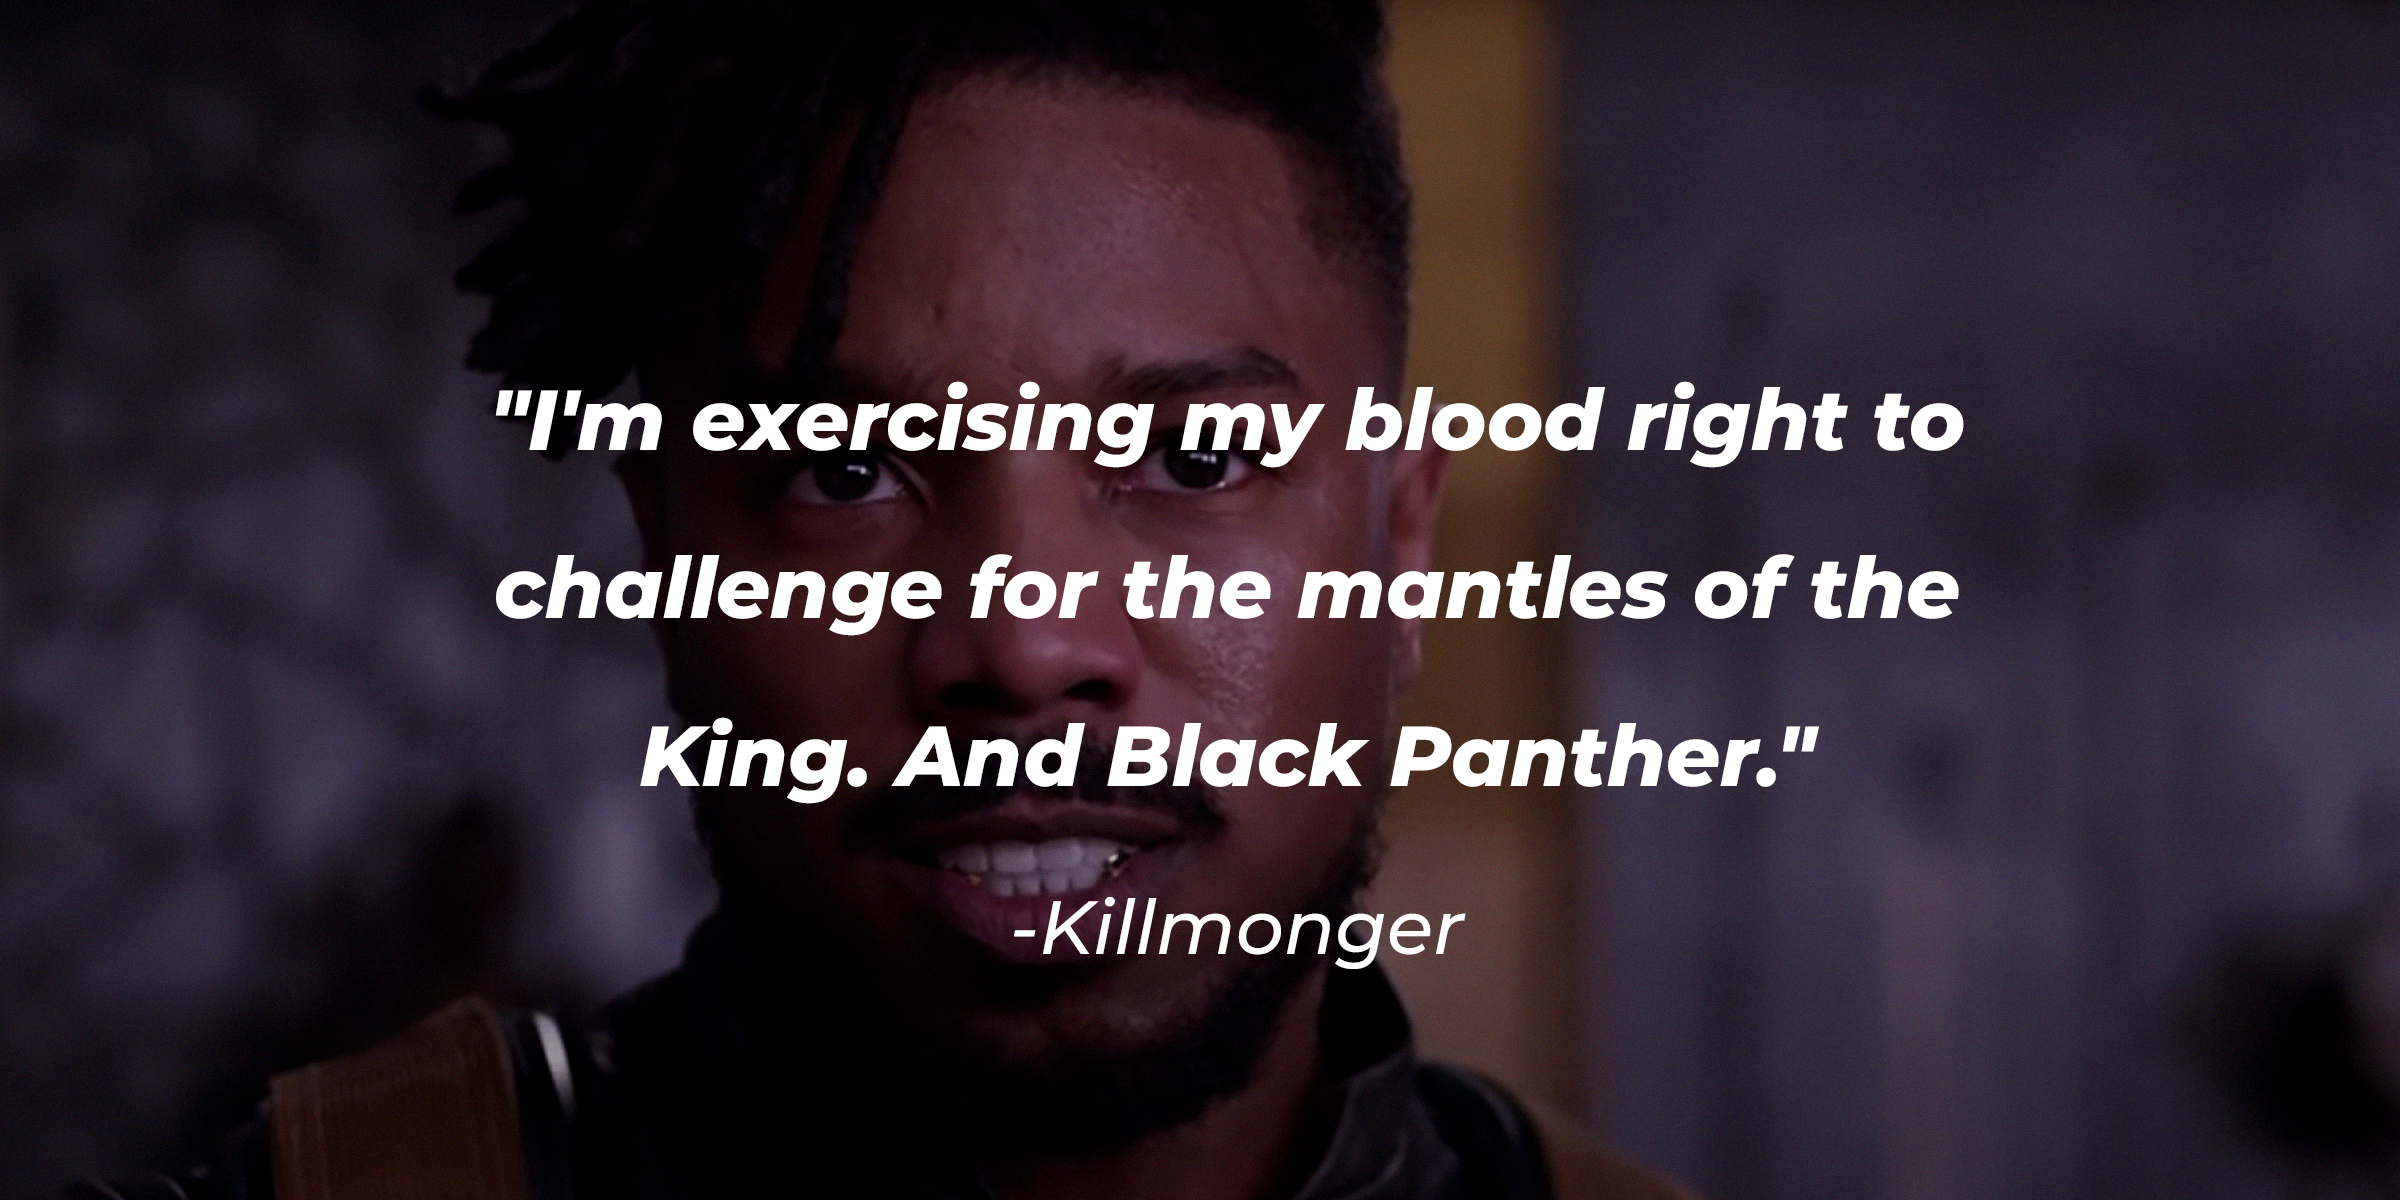 A photo of Killmonger with the quote: "I'm exercising my blood right to challenge for the mantles of the King. And Black Panther." | Source: youtube.com/marvel